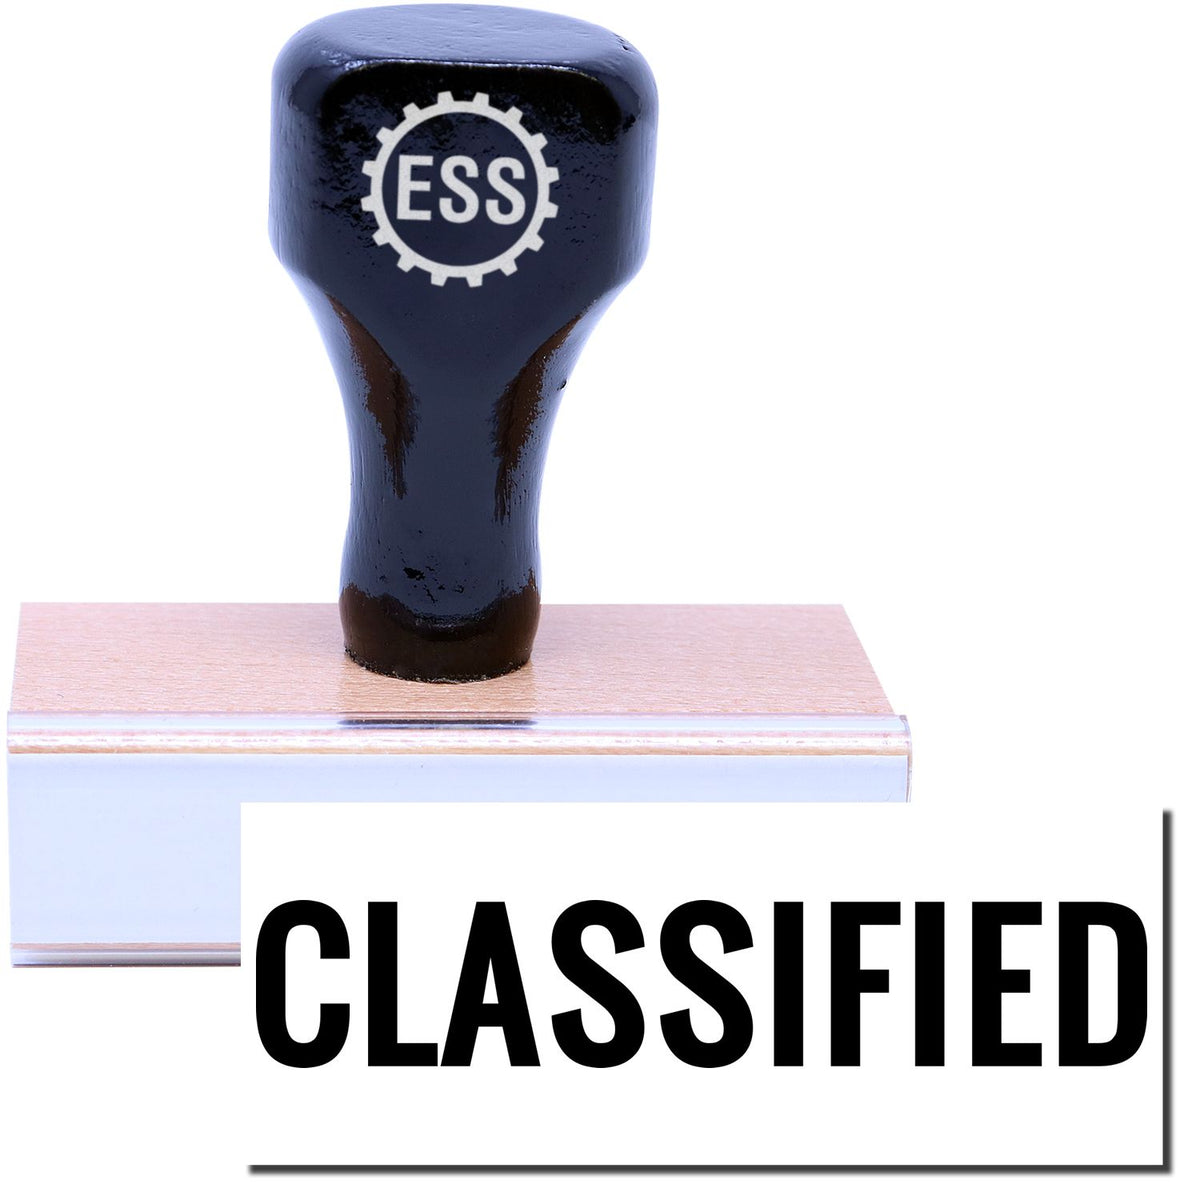 A stock office rubber stamp with a stamped image showing how the text &quot;CLASSIFIED&quot; in a large font is displayed after stamping.